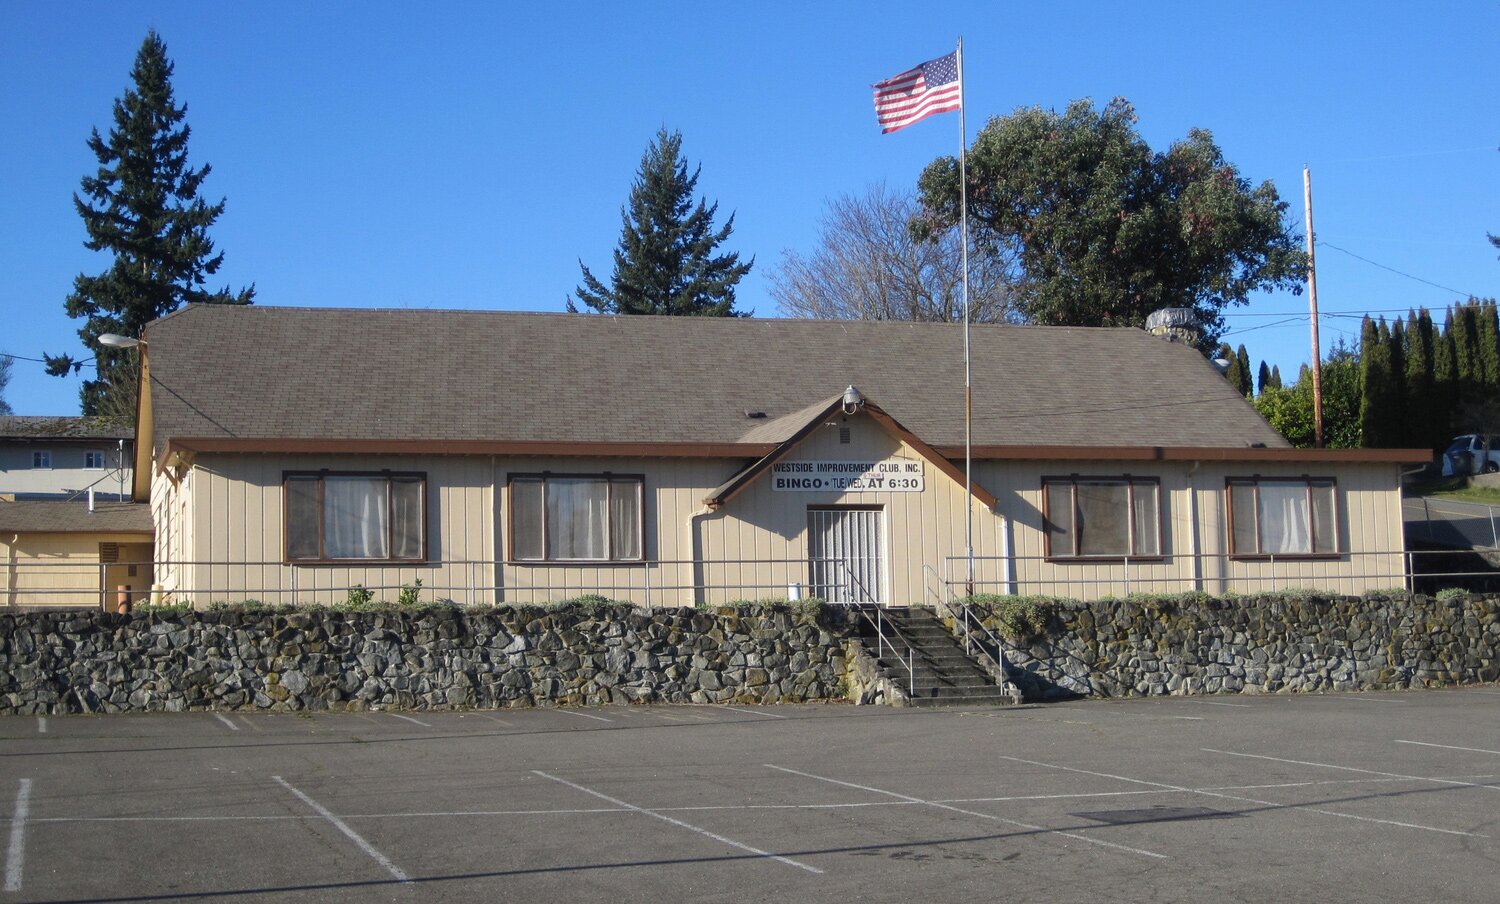 The West Side Improvement Club (WSIC),
located in West Bremerton at the corner of
National Avenue and E Street, has been in
existence for over 80 years